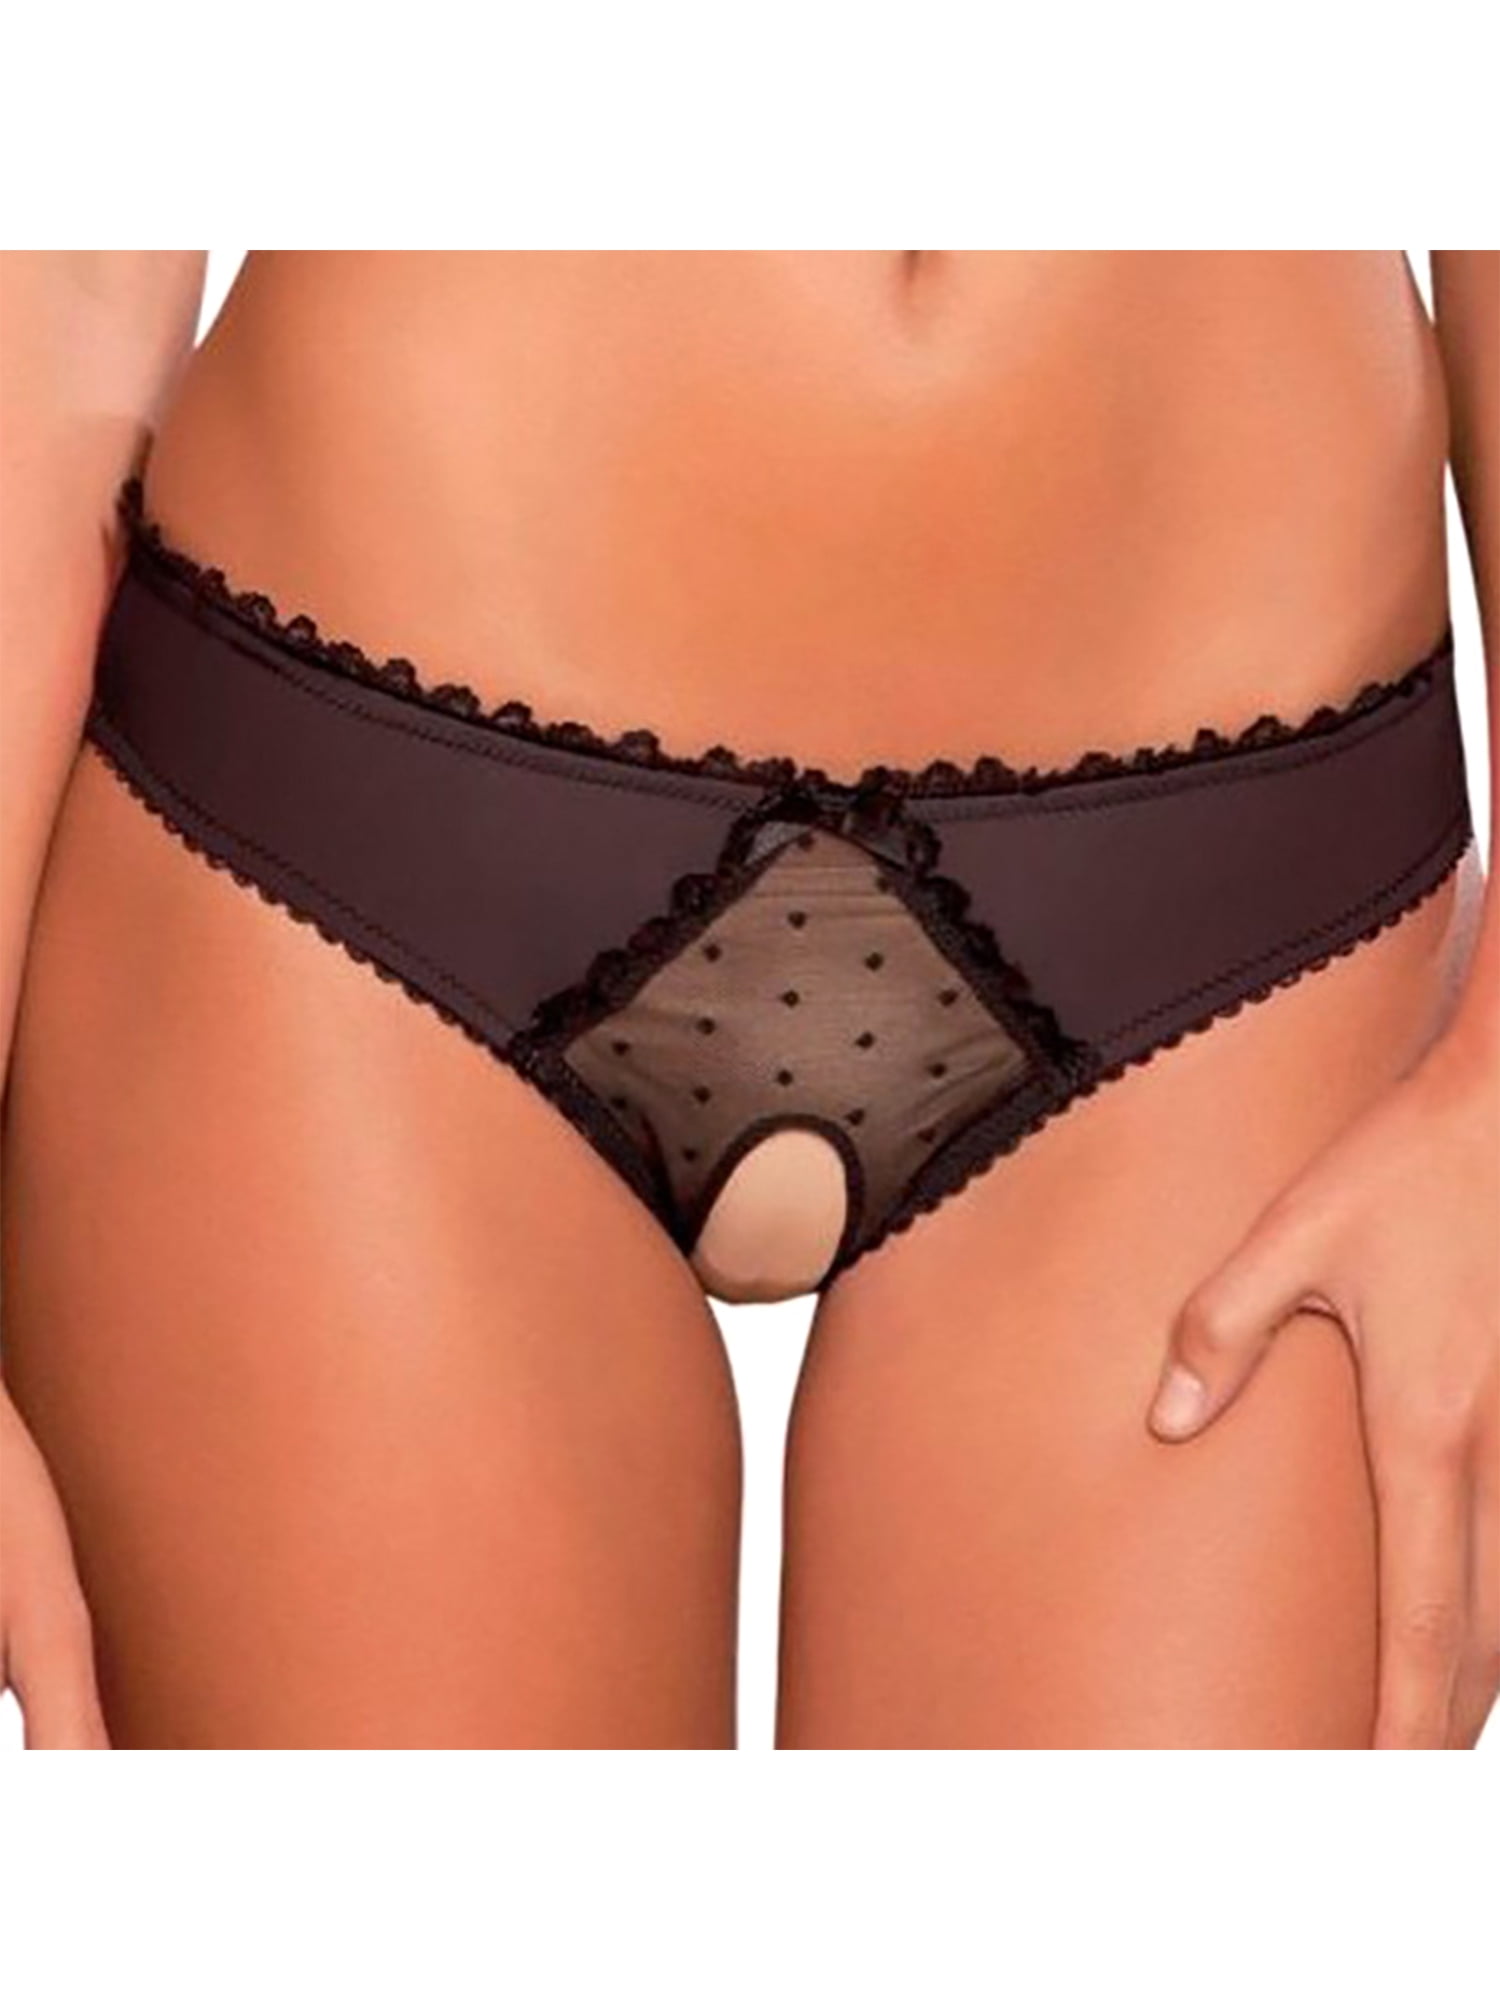 Womens Lace-up Panties Lingerie G-string Silk Satin Underwear Briefs Knickers 